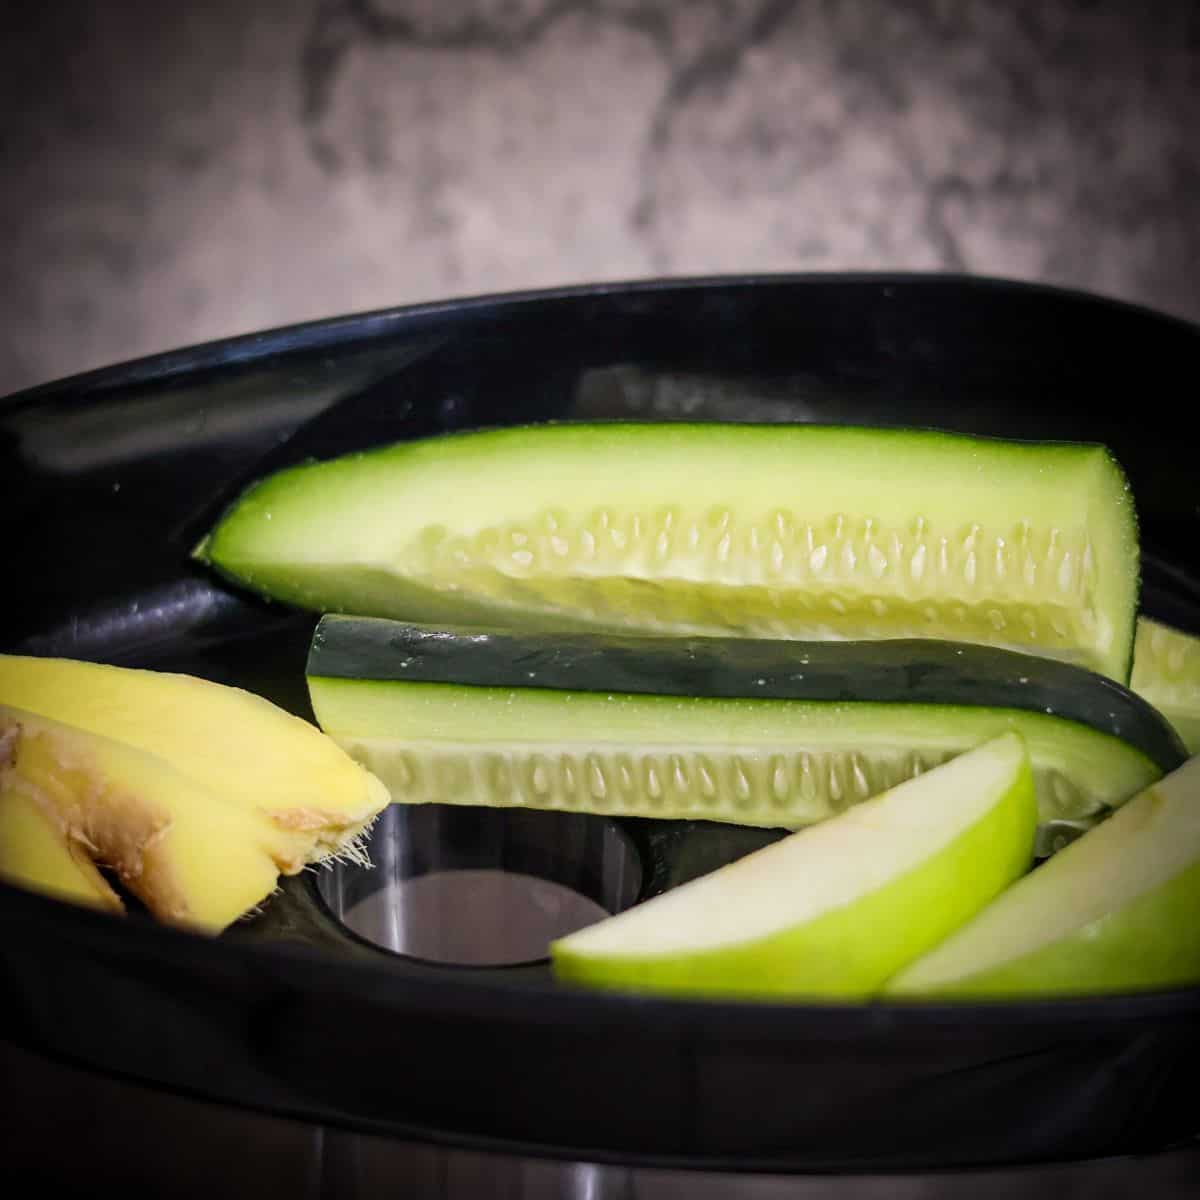 Slices of cucumber, green apple, and pieces of ginger in a juicer tray, ready for juicing.